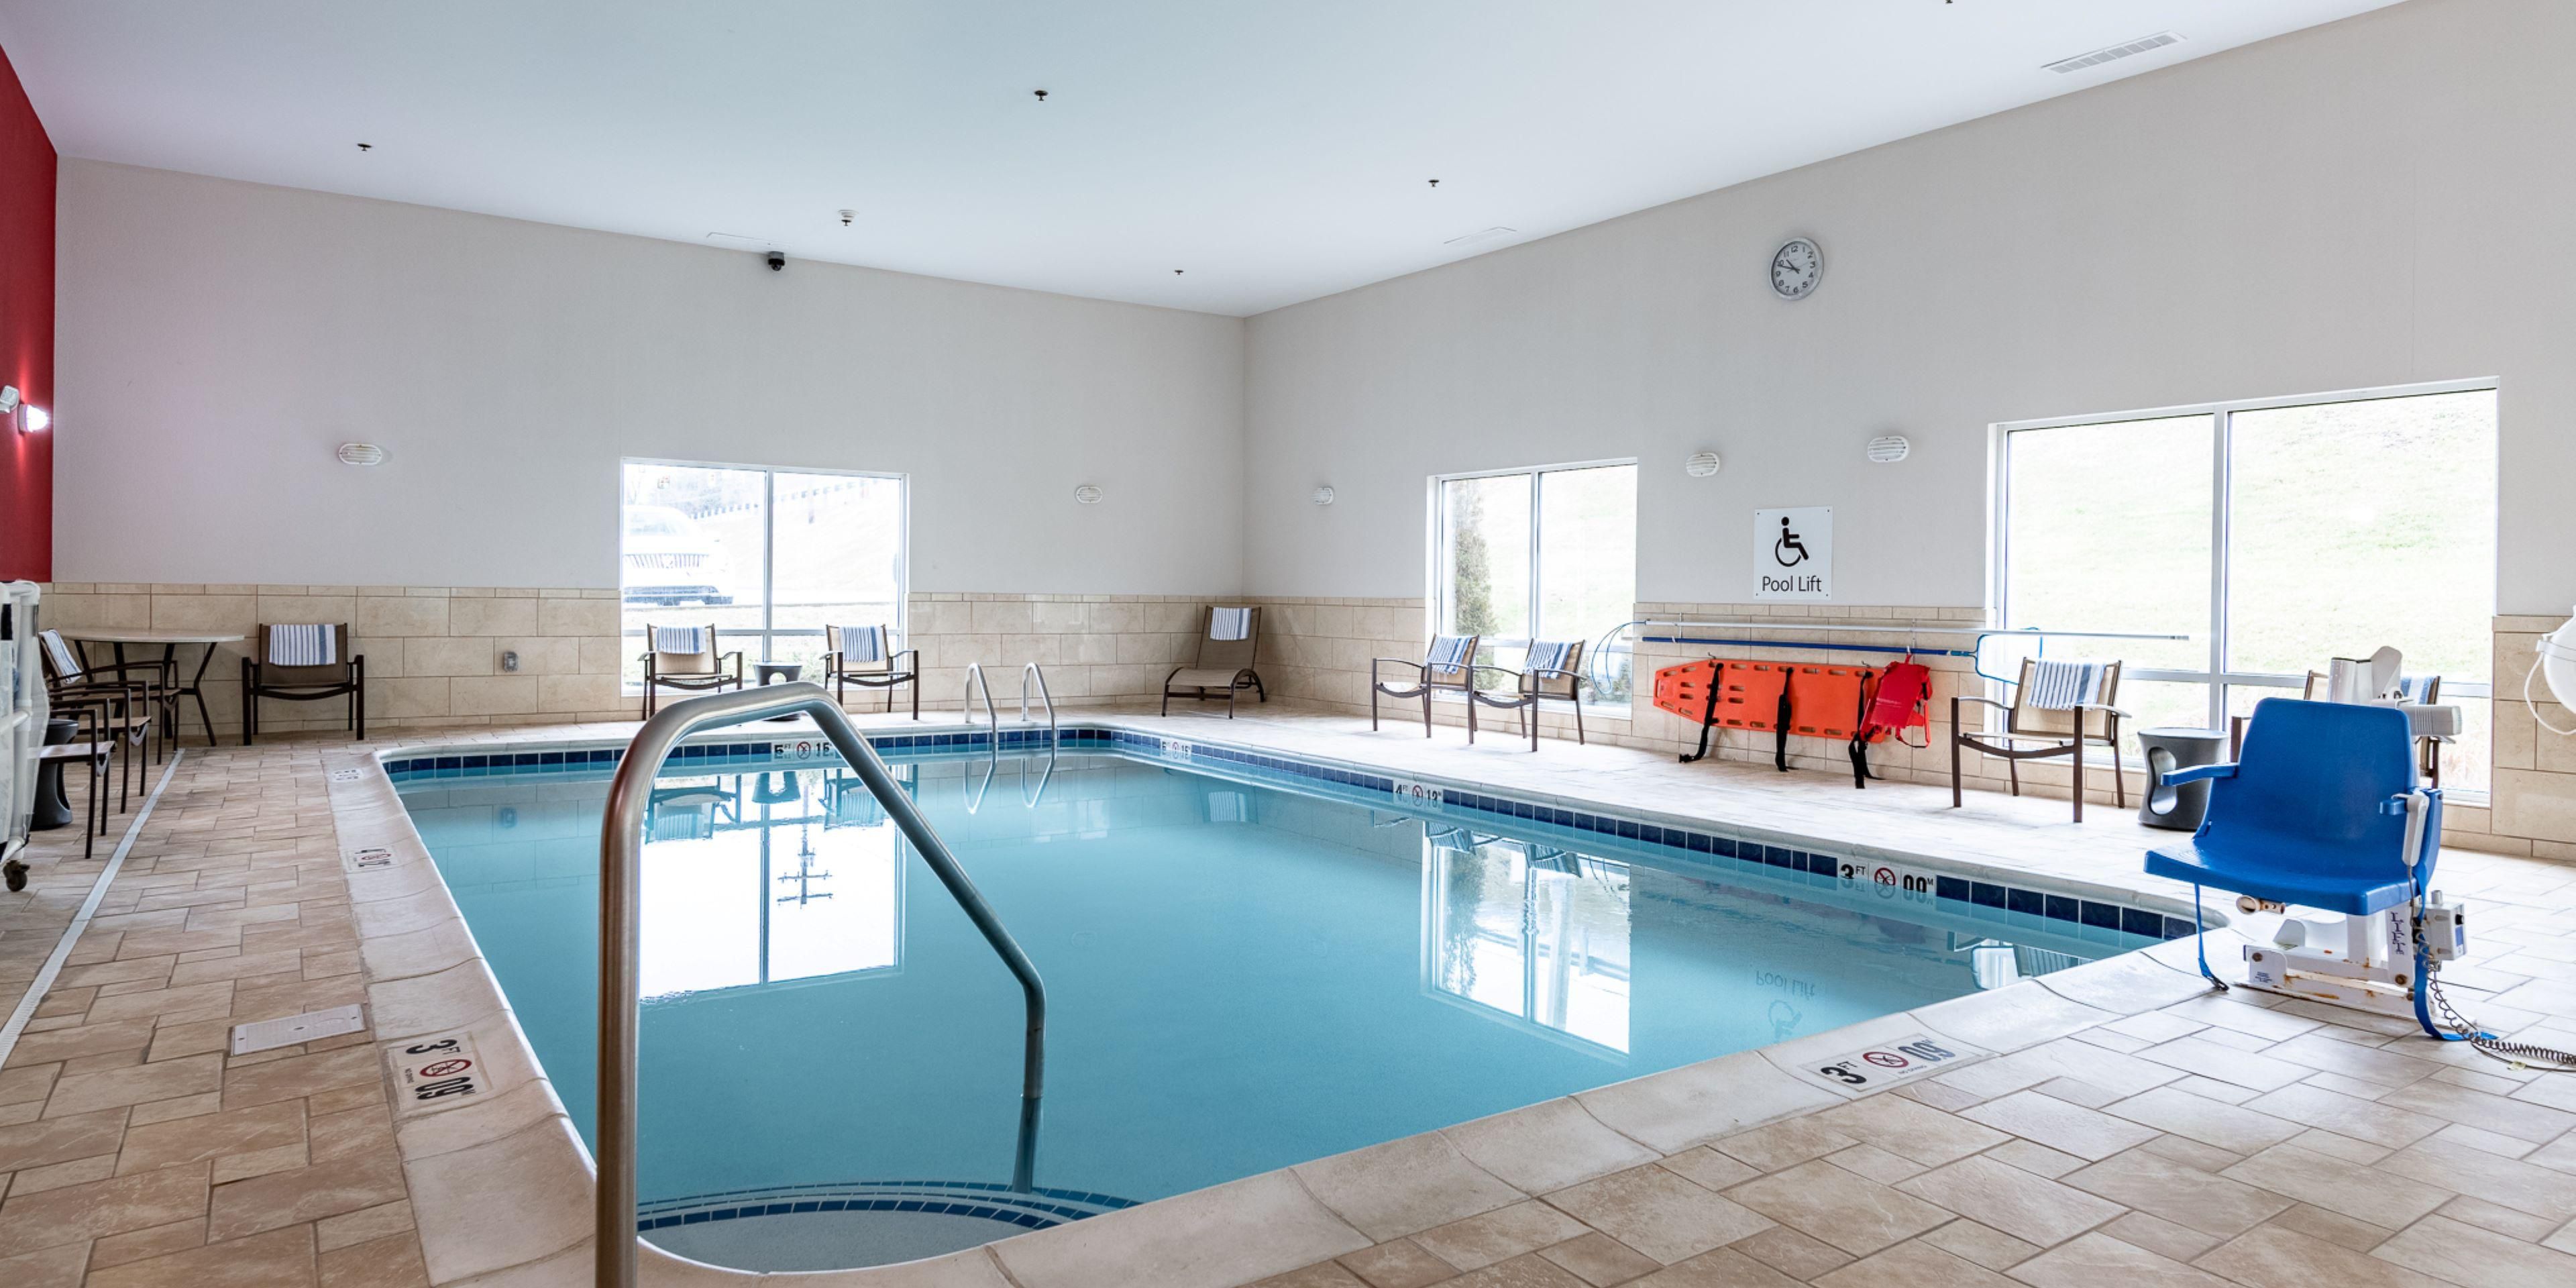 We are the only hotel with a pool in New Martinsville, WV! Relax in our indoor 24 hour pool or hot tub after a hard day working at our local plants or natural gas well pads. If you are in town for leisure, you can enjoy the pool any time. Get in, the water is warm!